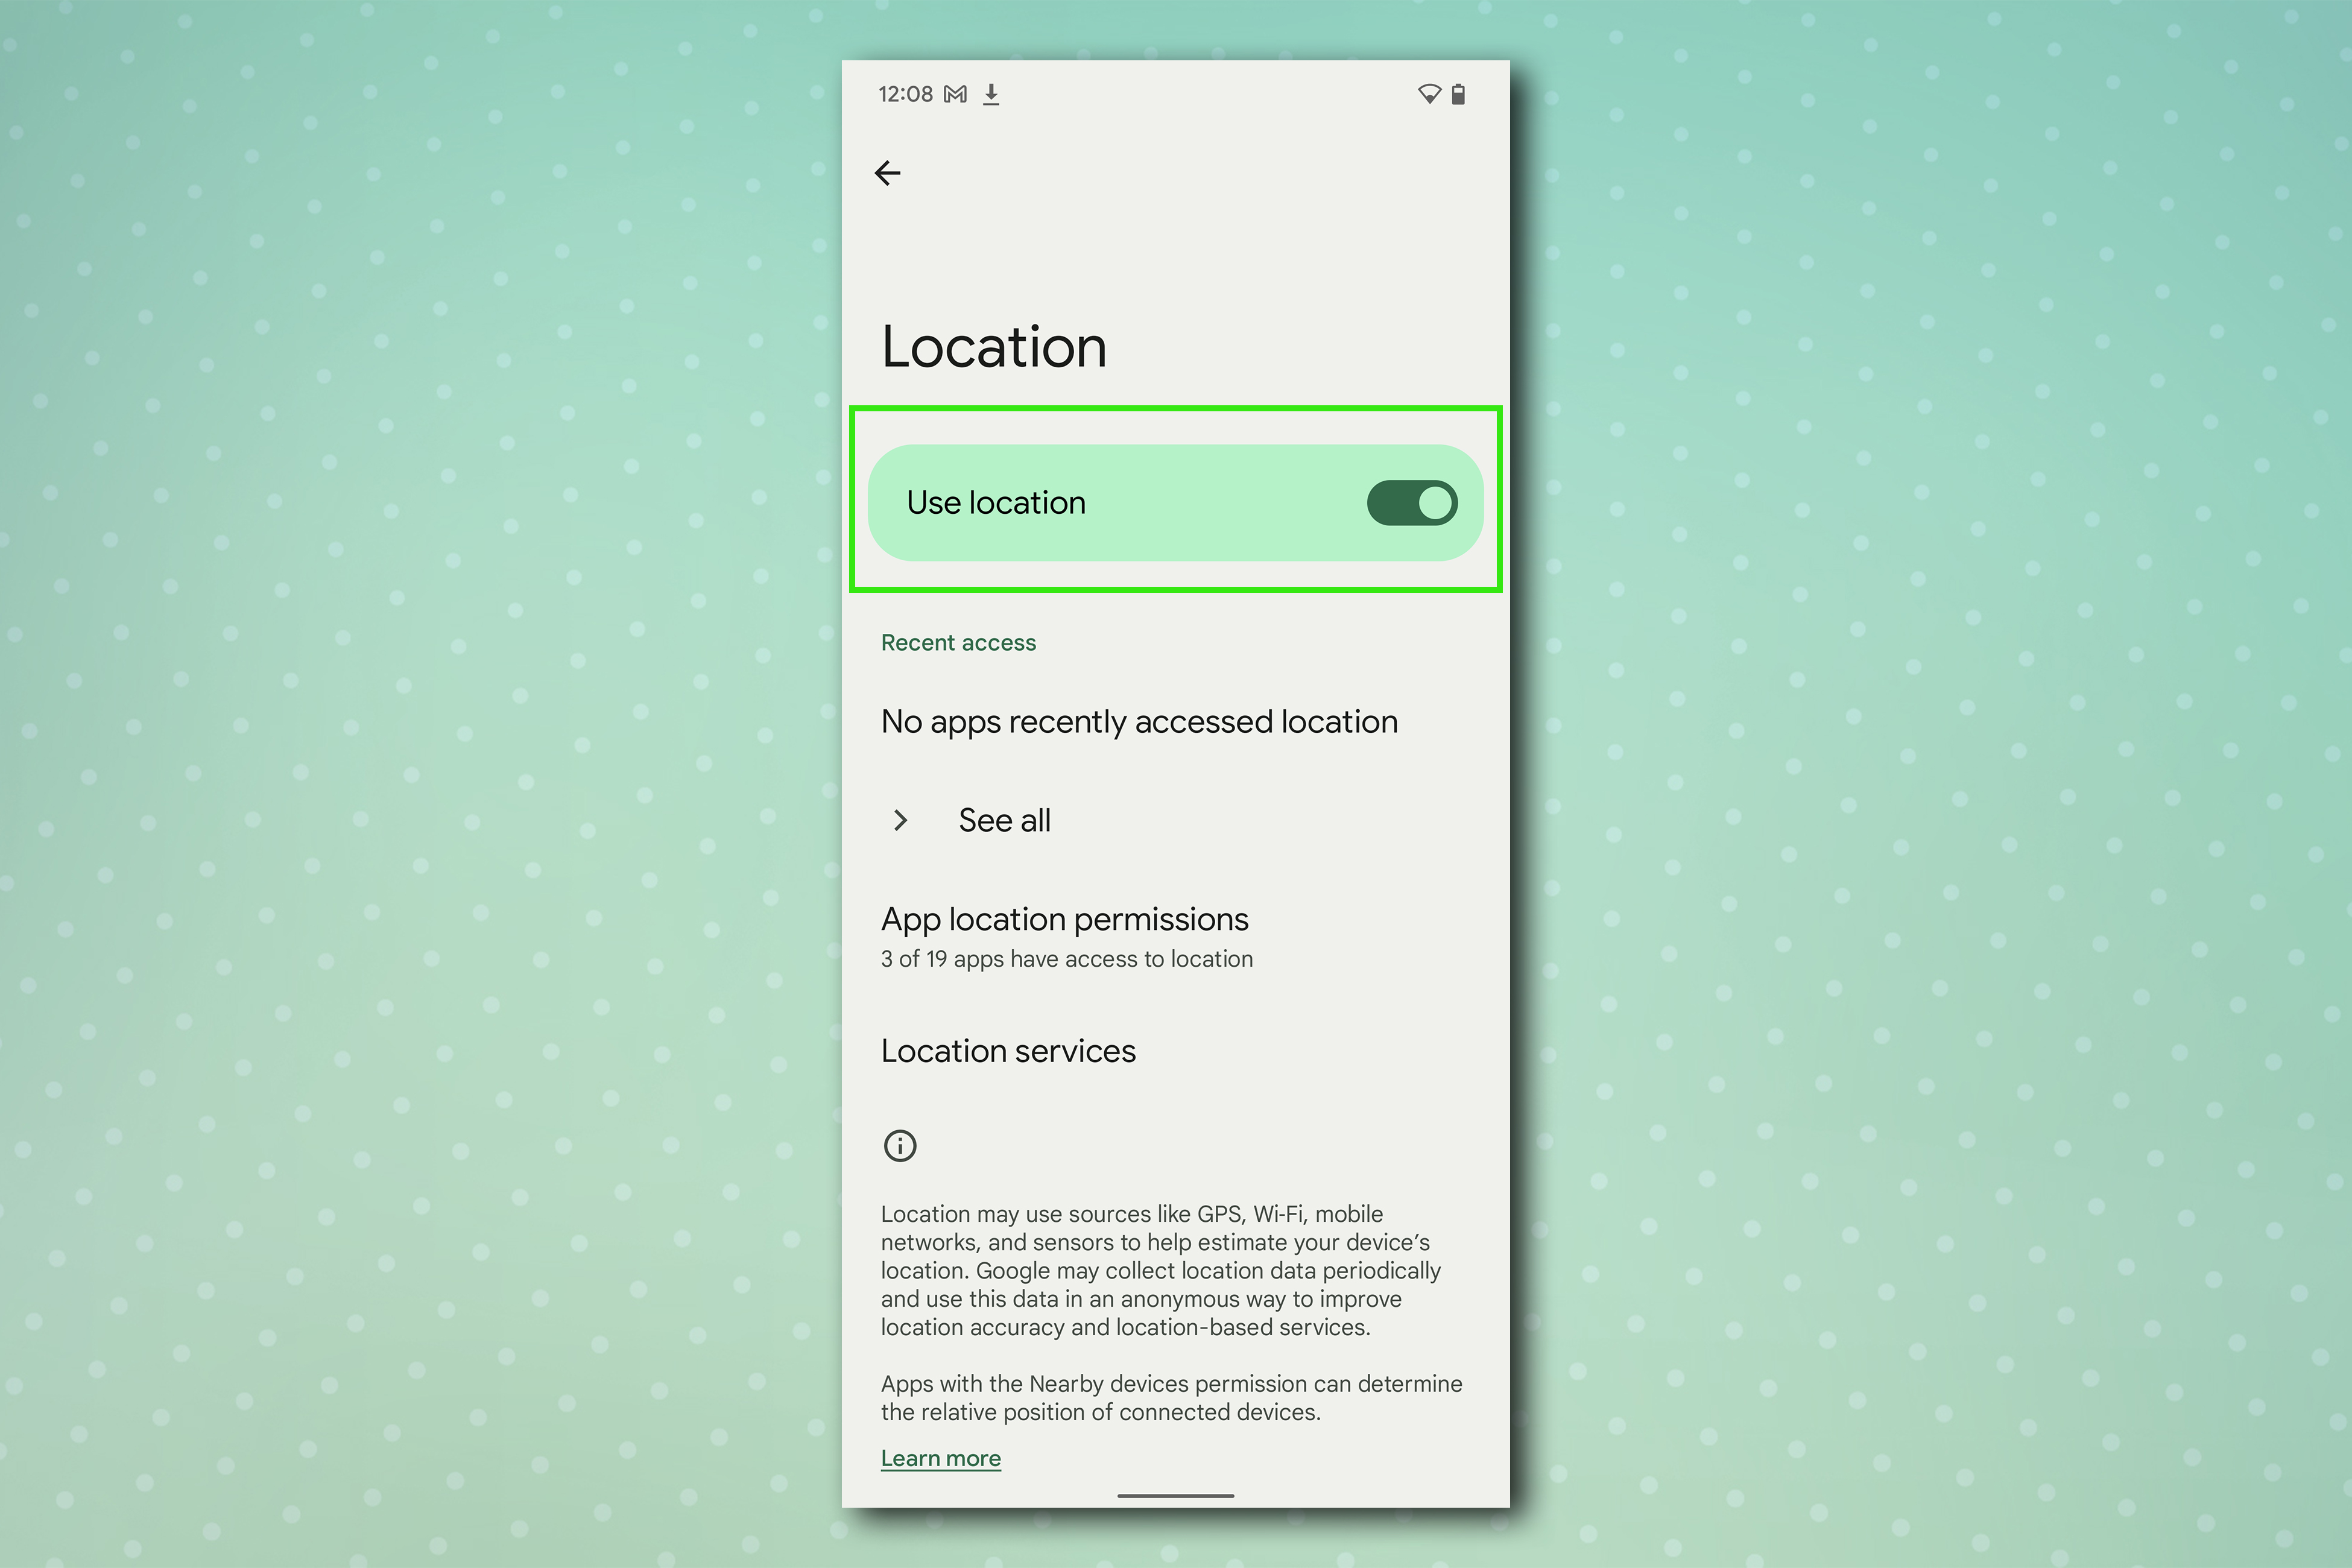 Android location settings page on Google Pixel